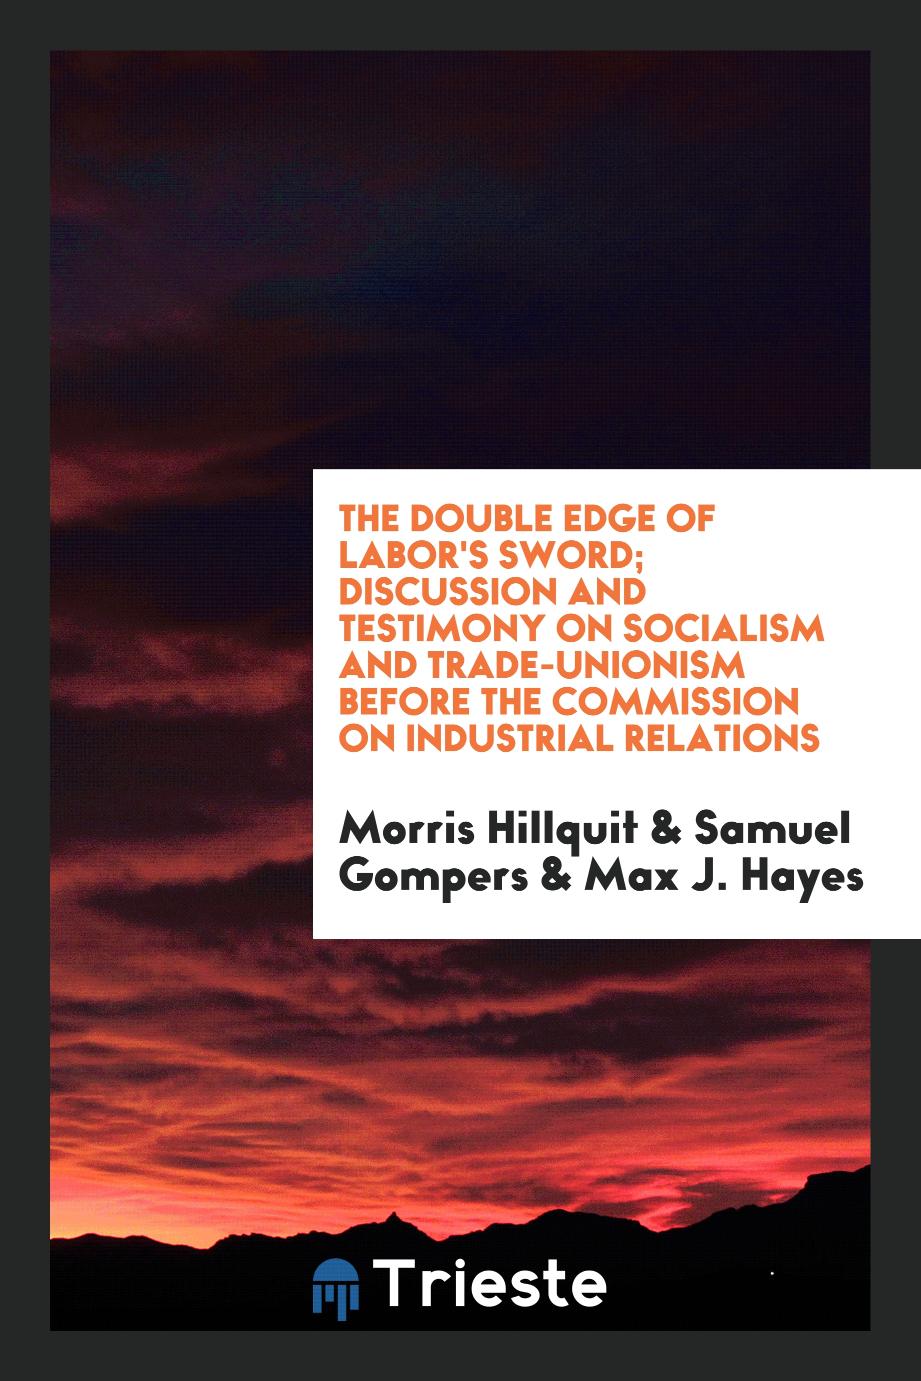 The double edge of labor's sword; discussion and testimony on socialism and trade-unionism before the Commission on Industrial Relations